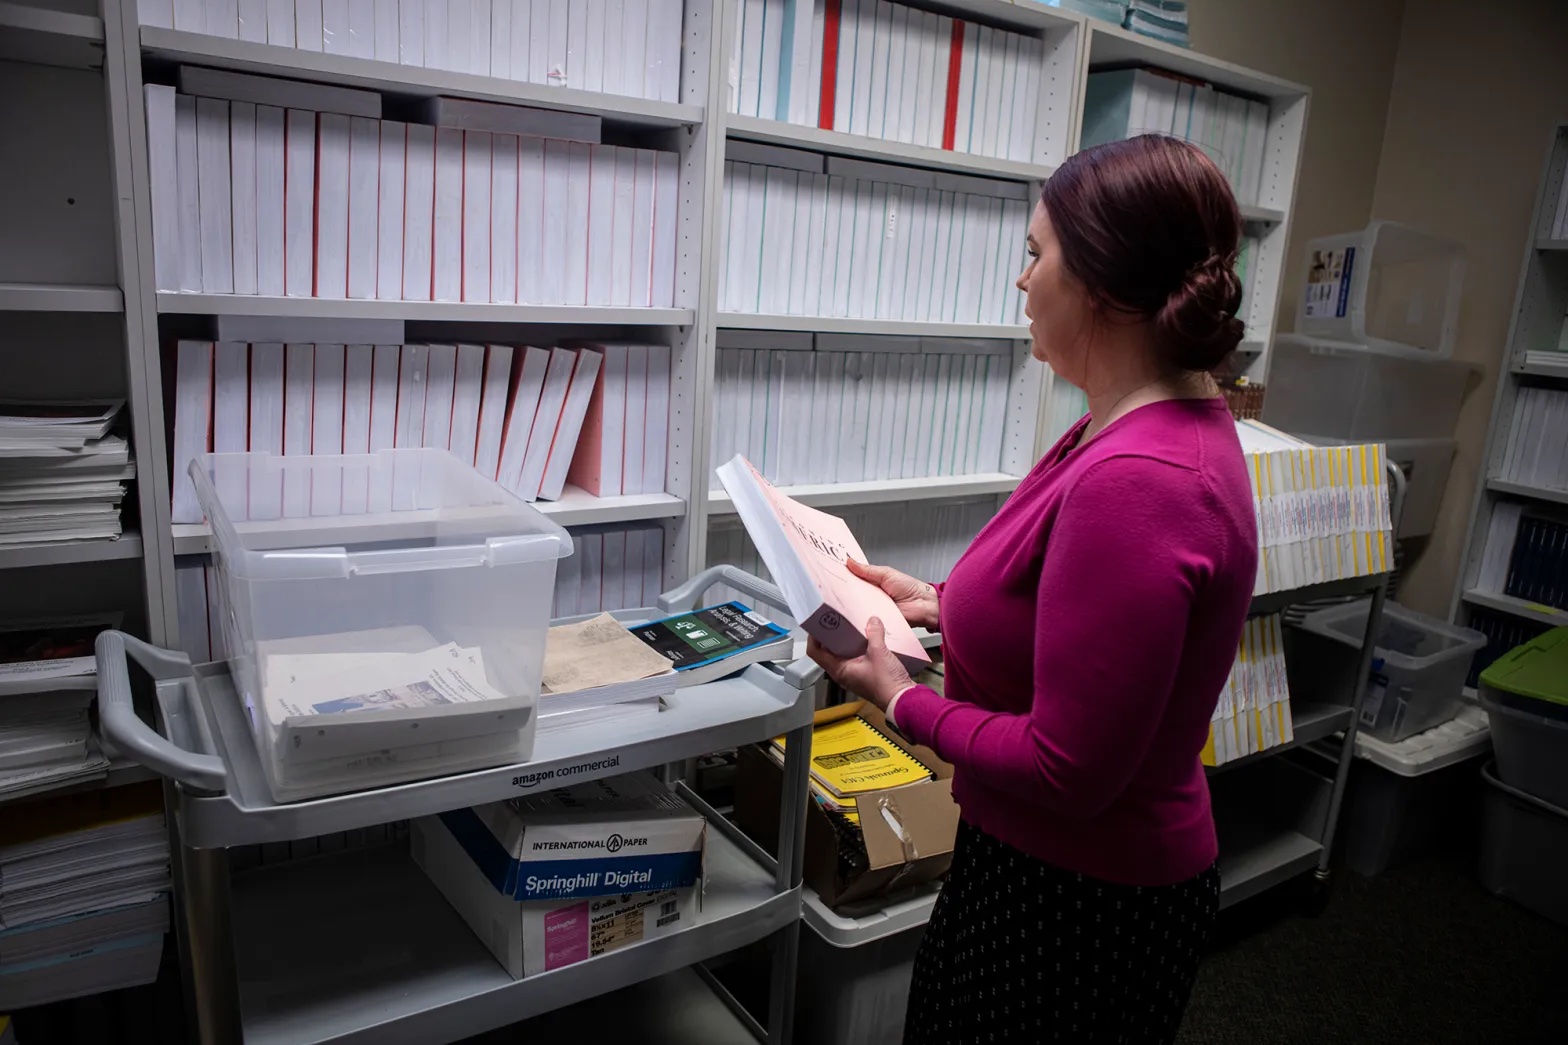 the side view of a middle-aged woman with her hair pulled back, filing a stack of white books on a shelf